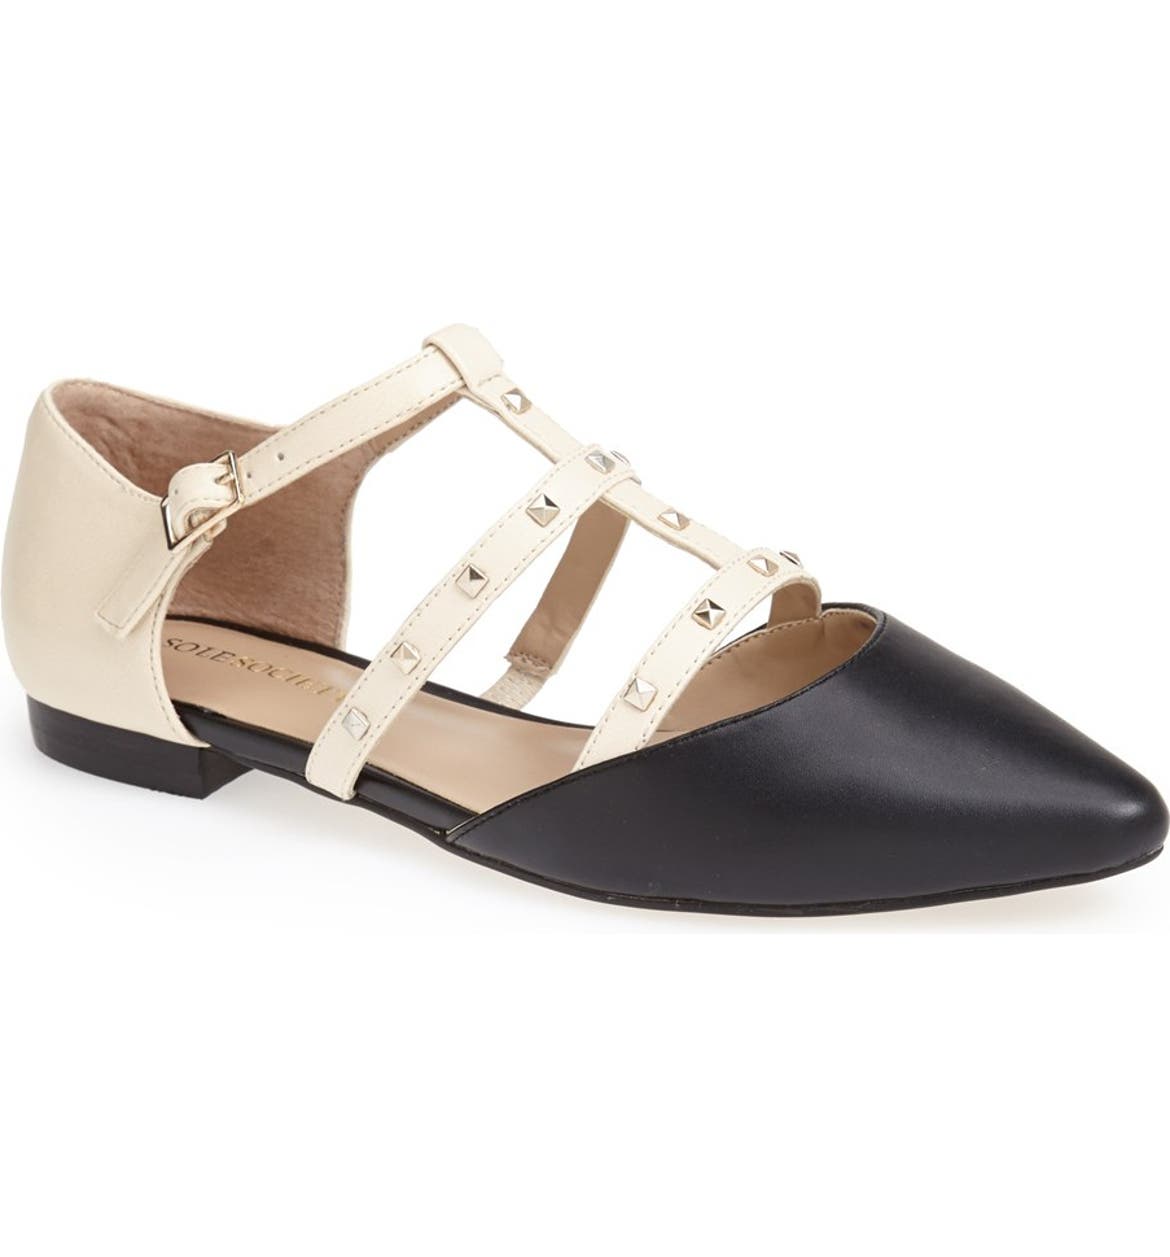 SOLE SOCIETY SUSIE FLAT | Nordstrom